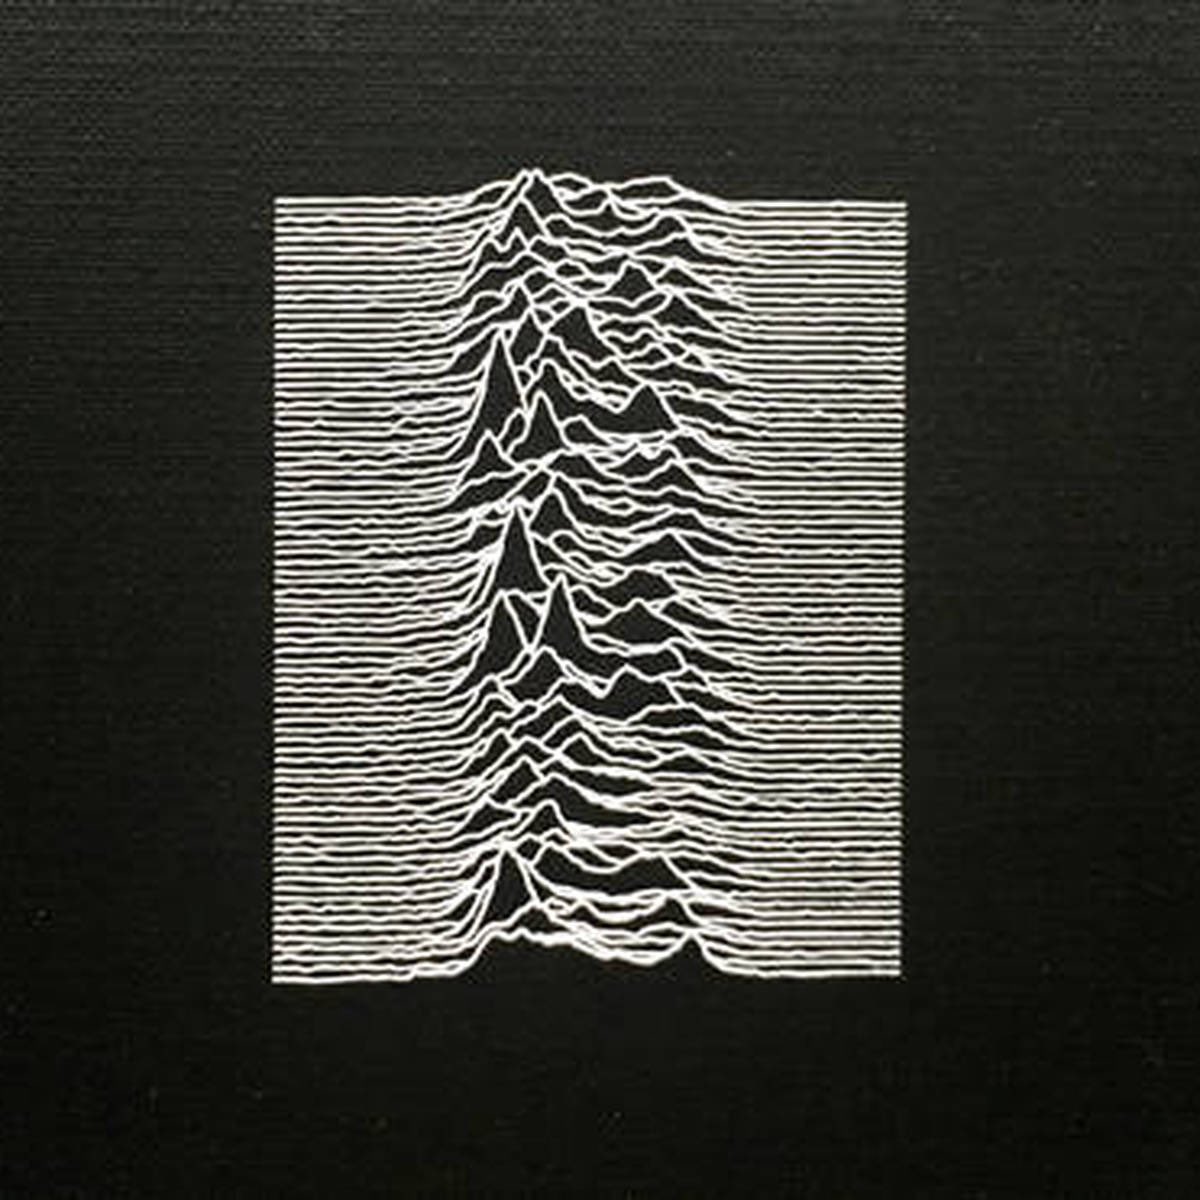 Storm Jocelyn is named for Lurgan astrophysicist Jocelyn Bell Burnell who first detected the radio pulsar ‘CP 1919’ and inadvertently gave Joy Division the cover of their album Unknown Pleasures. So anyway now I’m forcing the kids to listen to She’s Lost Control…